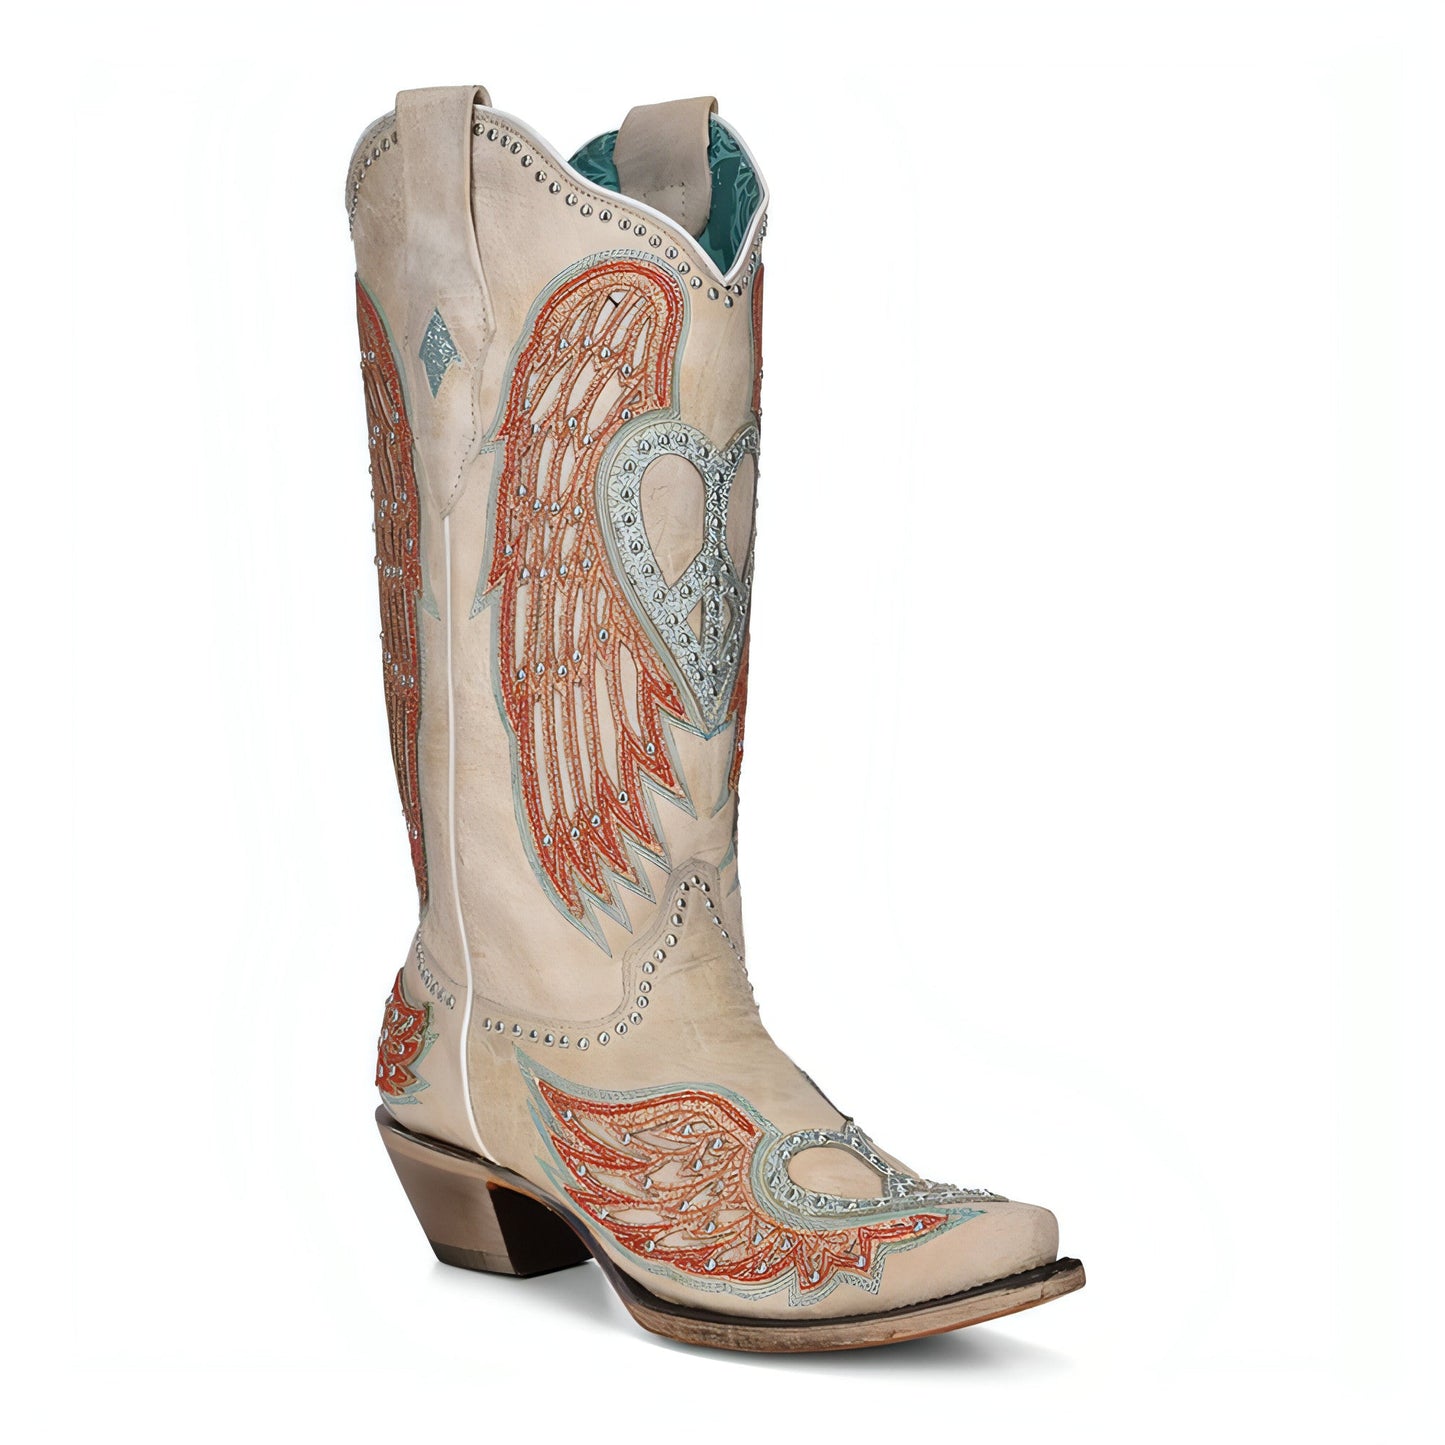 Corral LD Bone Heart & Wings & Embroidery & Studs Boots